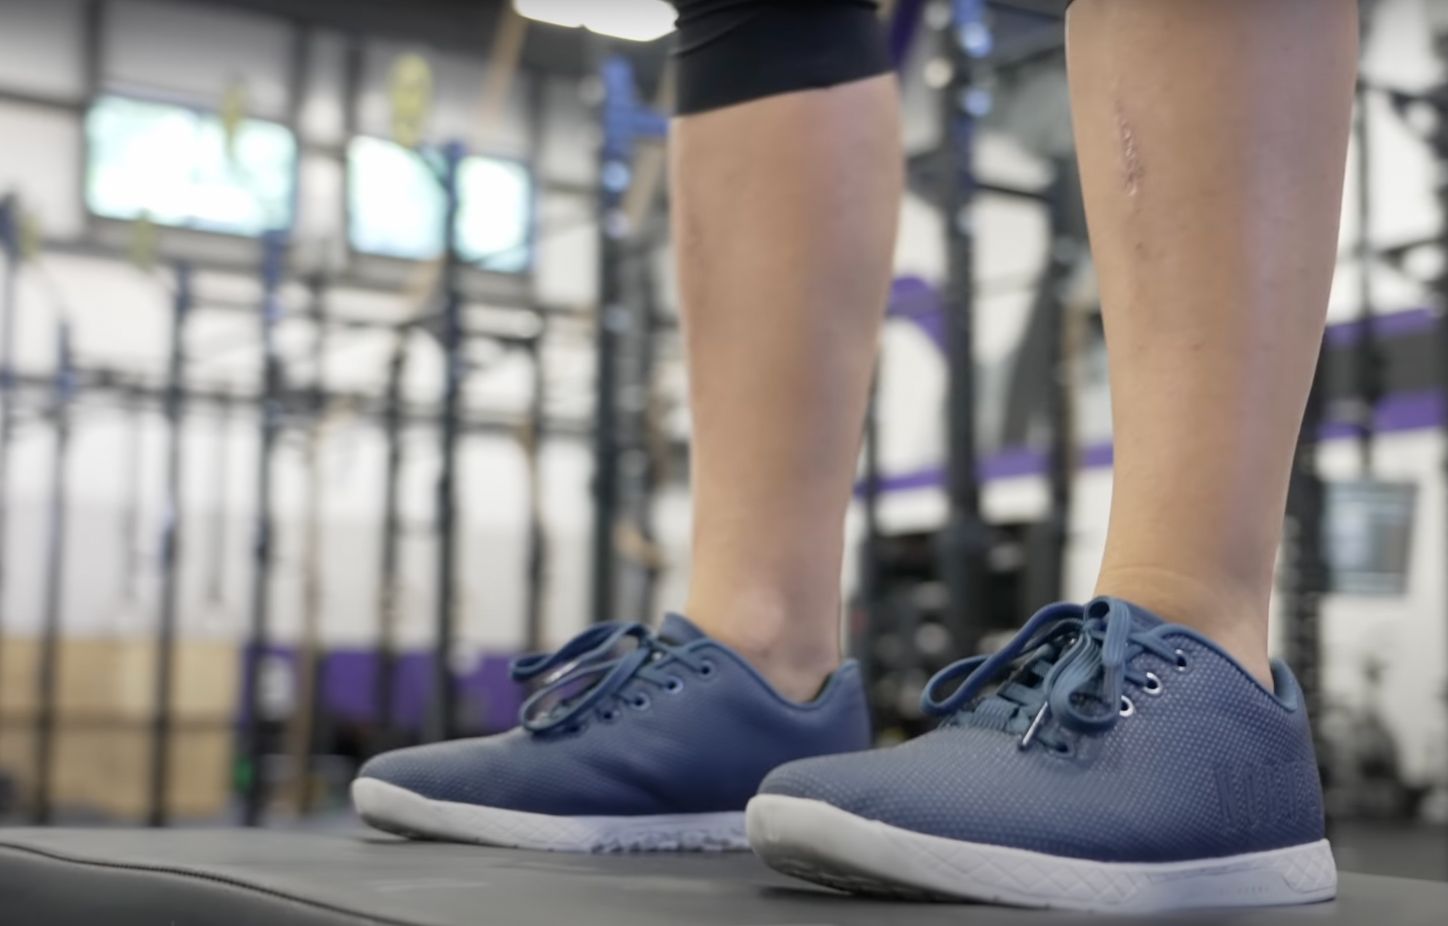 Nobull High-Top Trainer+ Review: Do These Kicks Elevate Your Gym